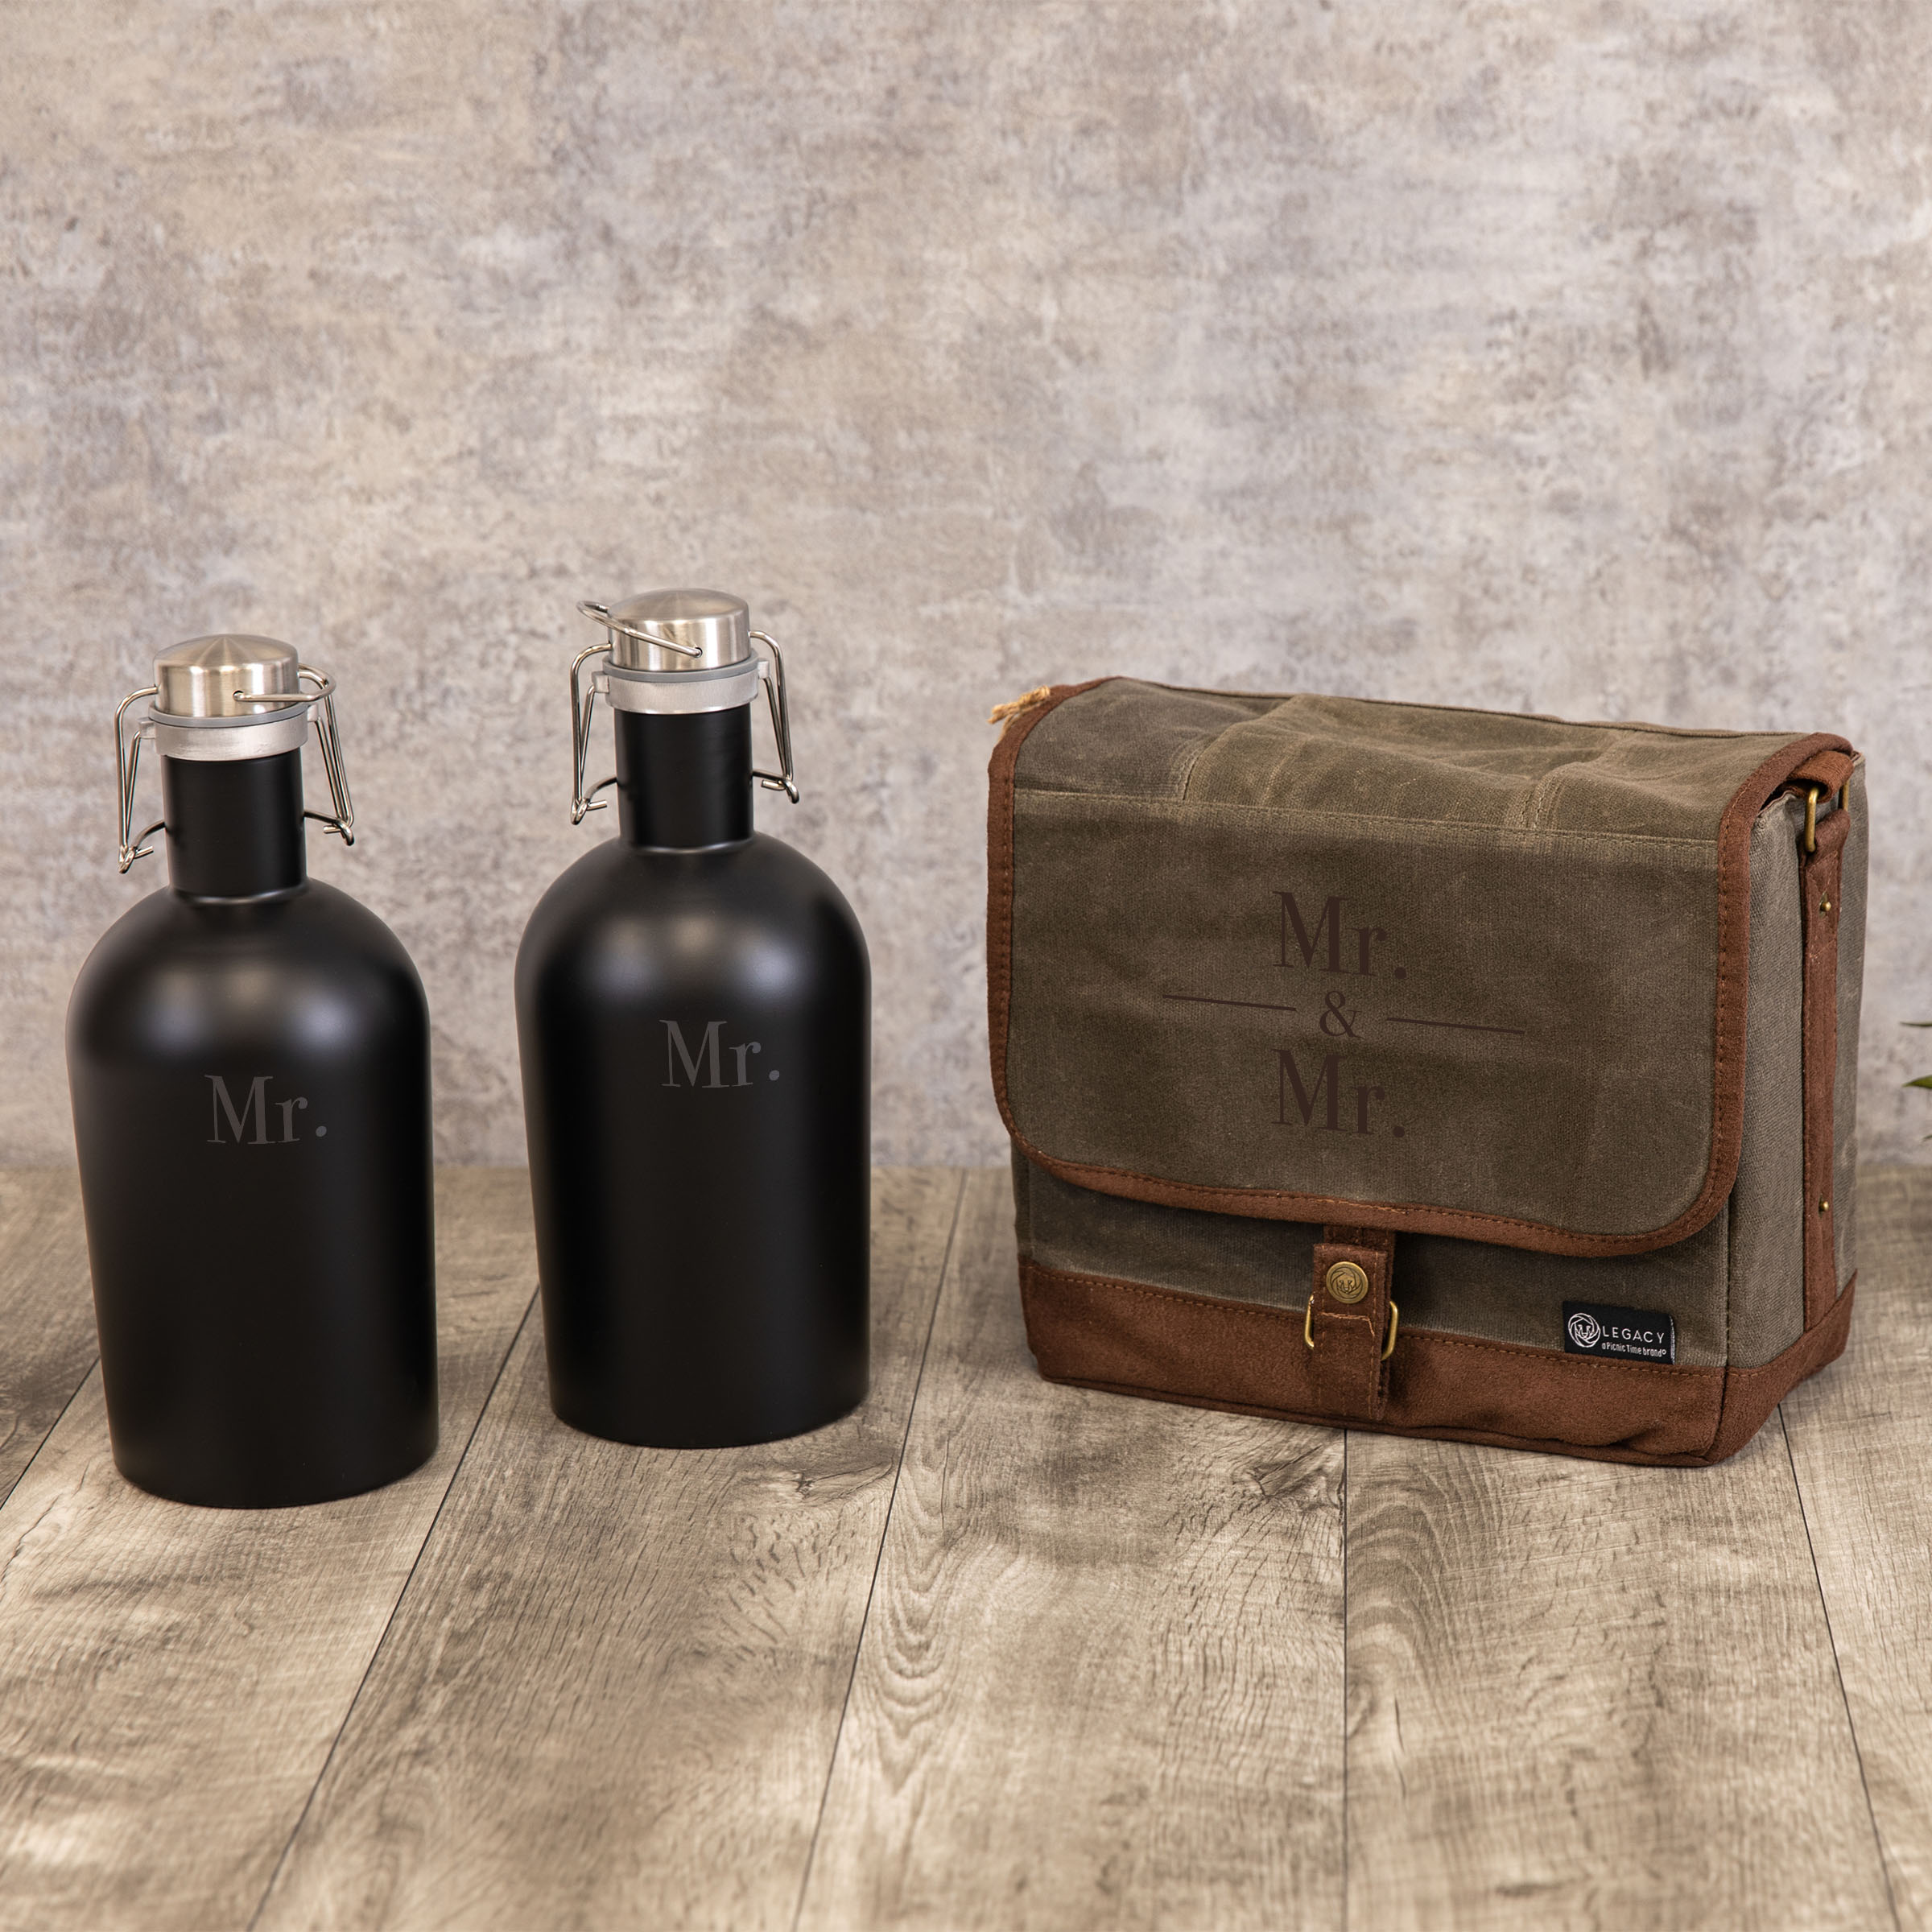 Mr/Mr - Wedding/Anniversary - Double Growler Tote with Growlers Gift Set